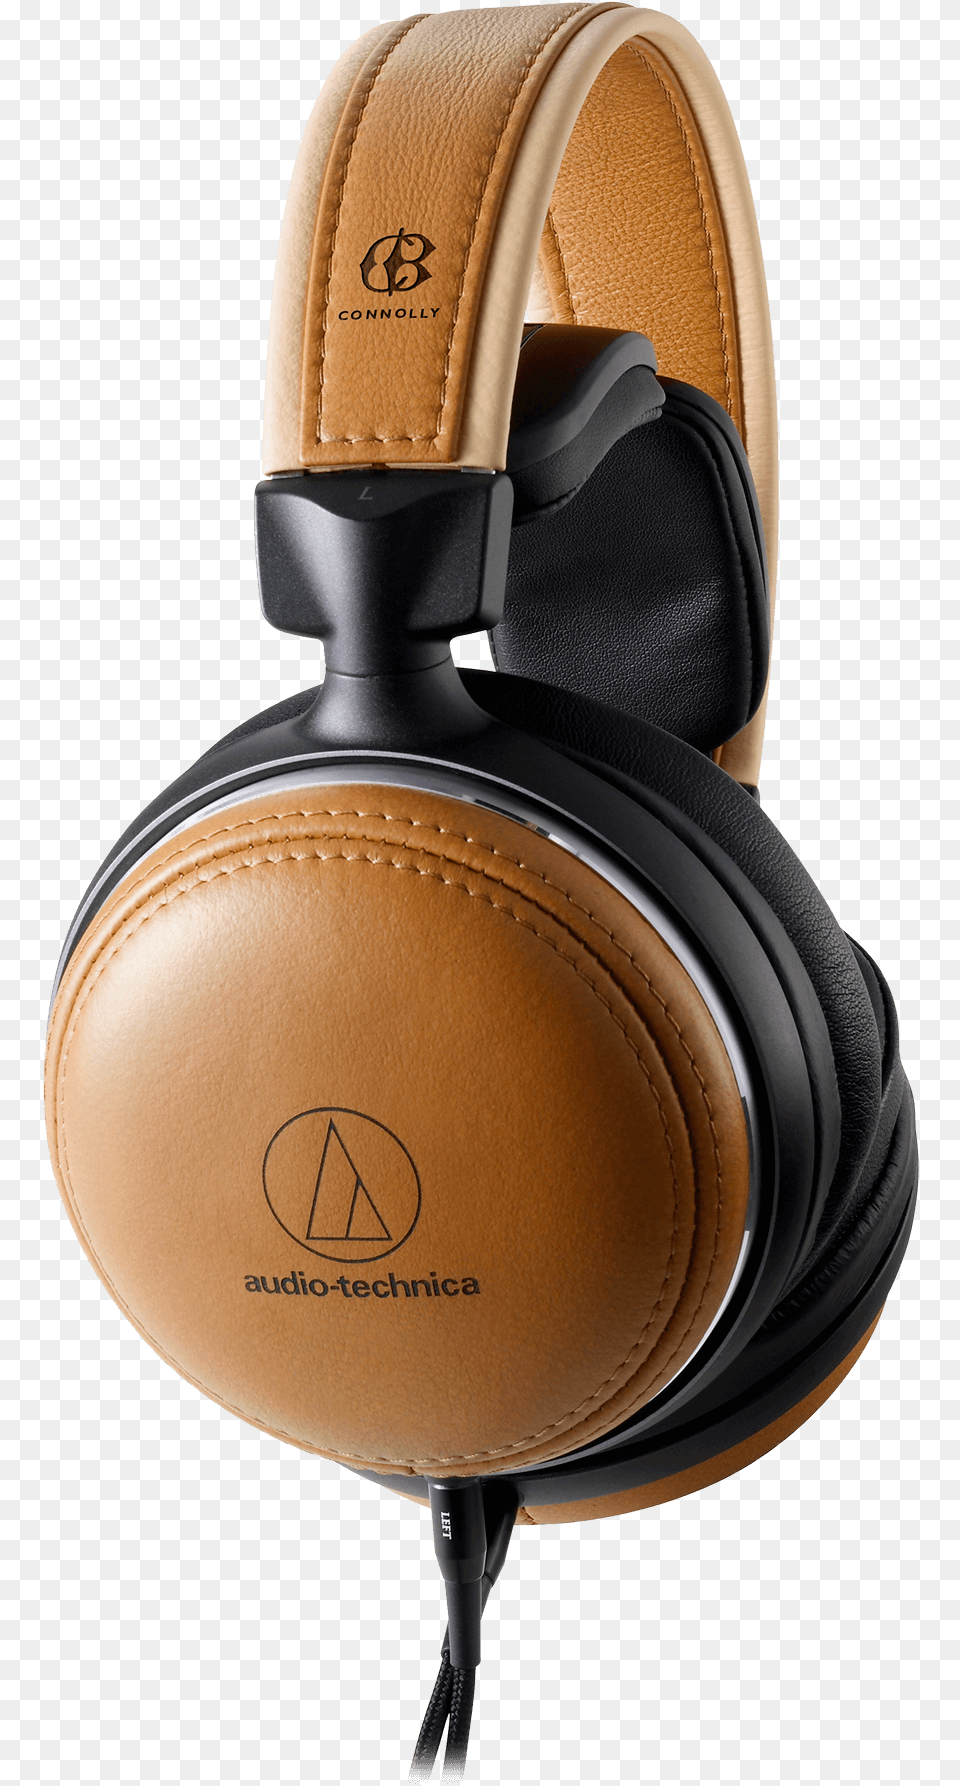 Ath Audio Technica Ath L5000, Electronics, Headphones Free Png Download